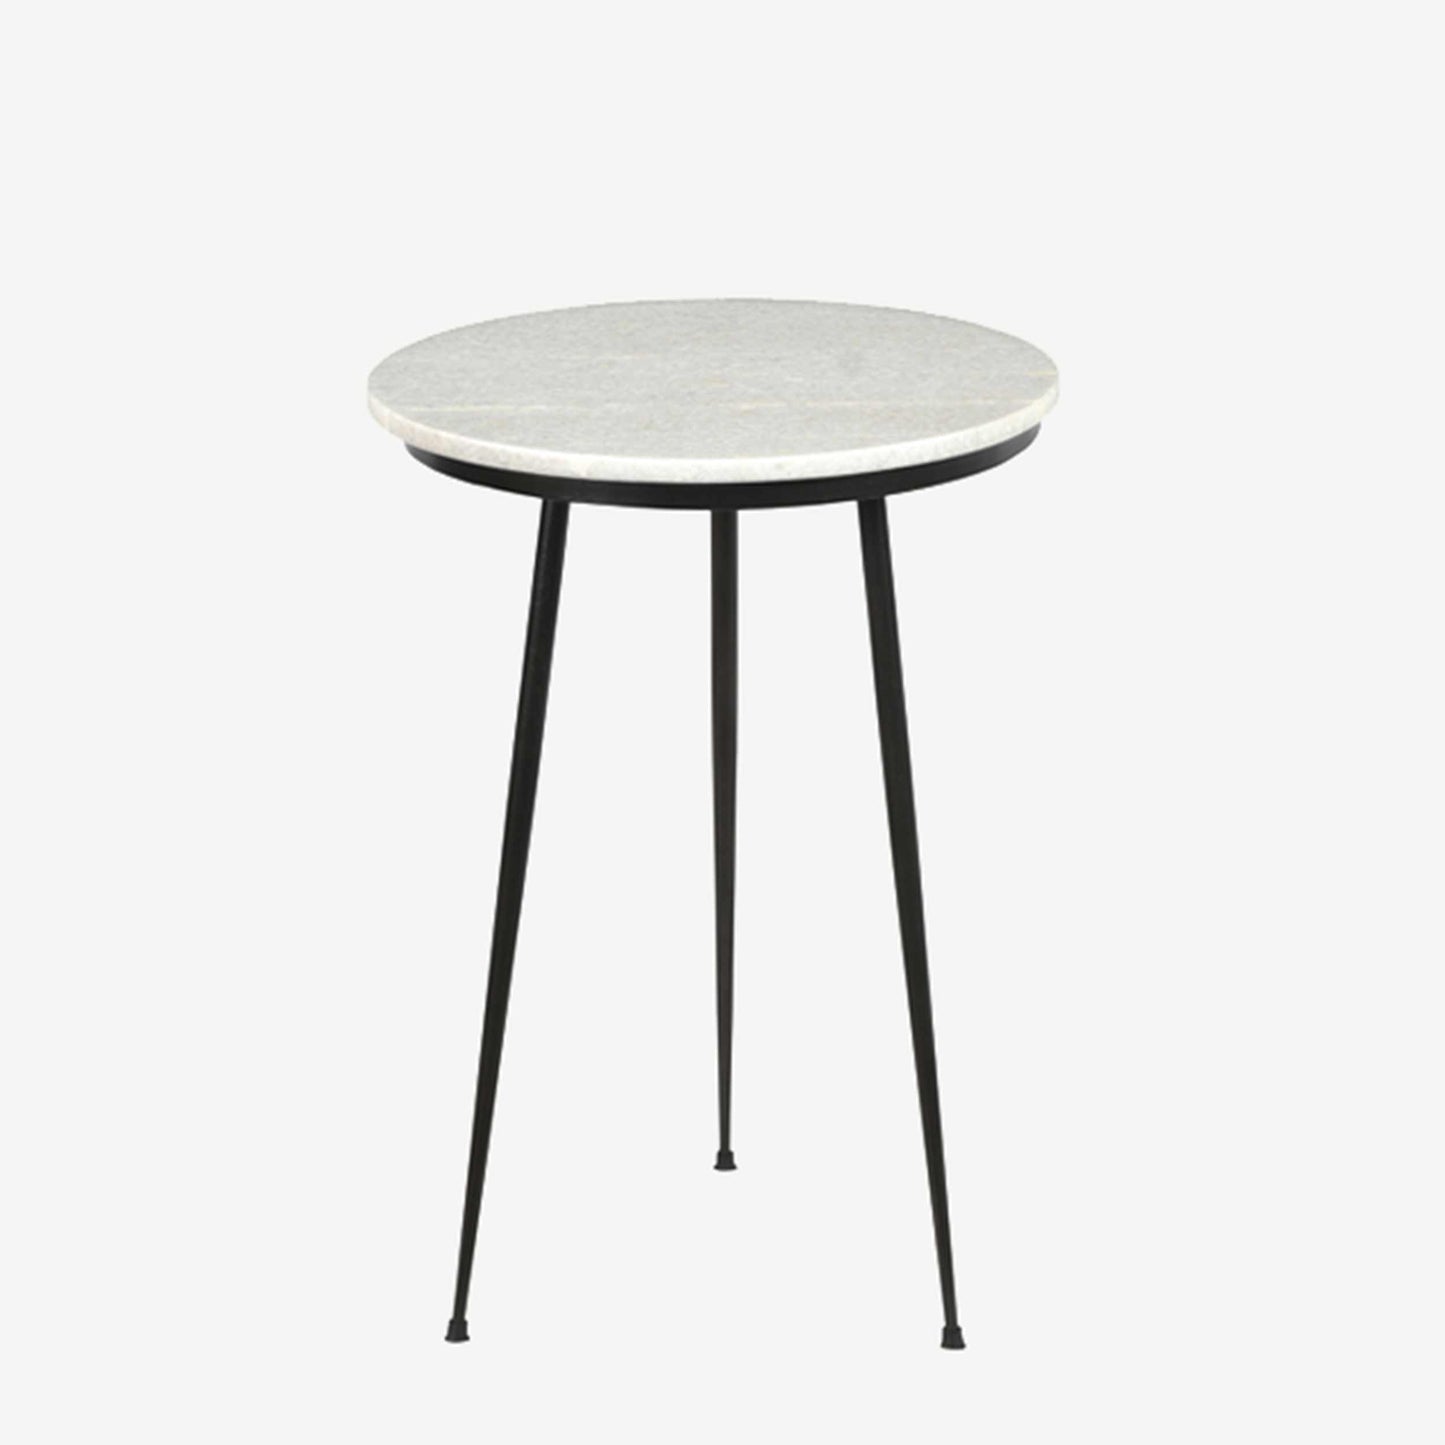 The Sorcha Marble Tripod Side Table